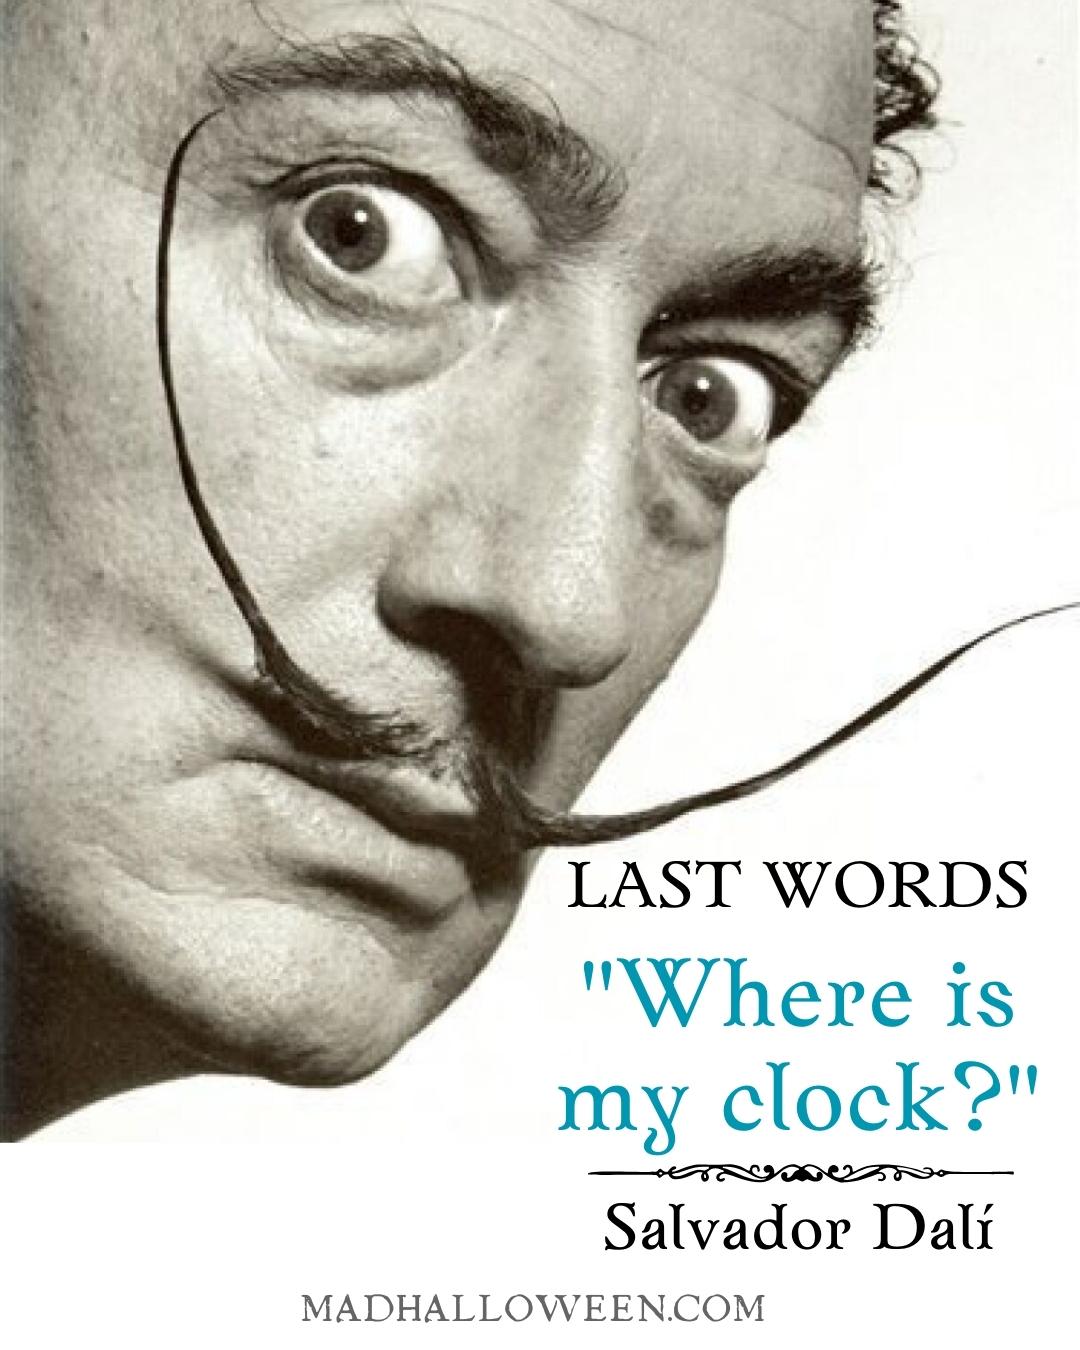 Famous Last Words Quotes of the Departed - Salvador Dali - Mad Halloween